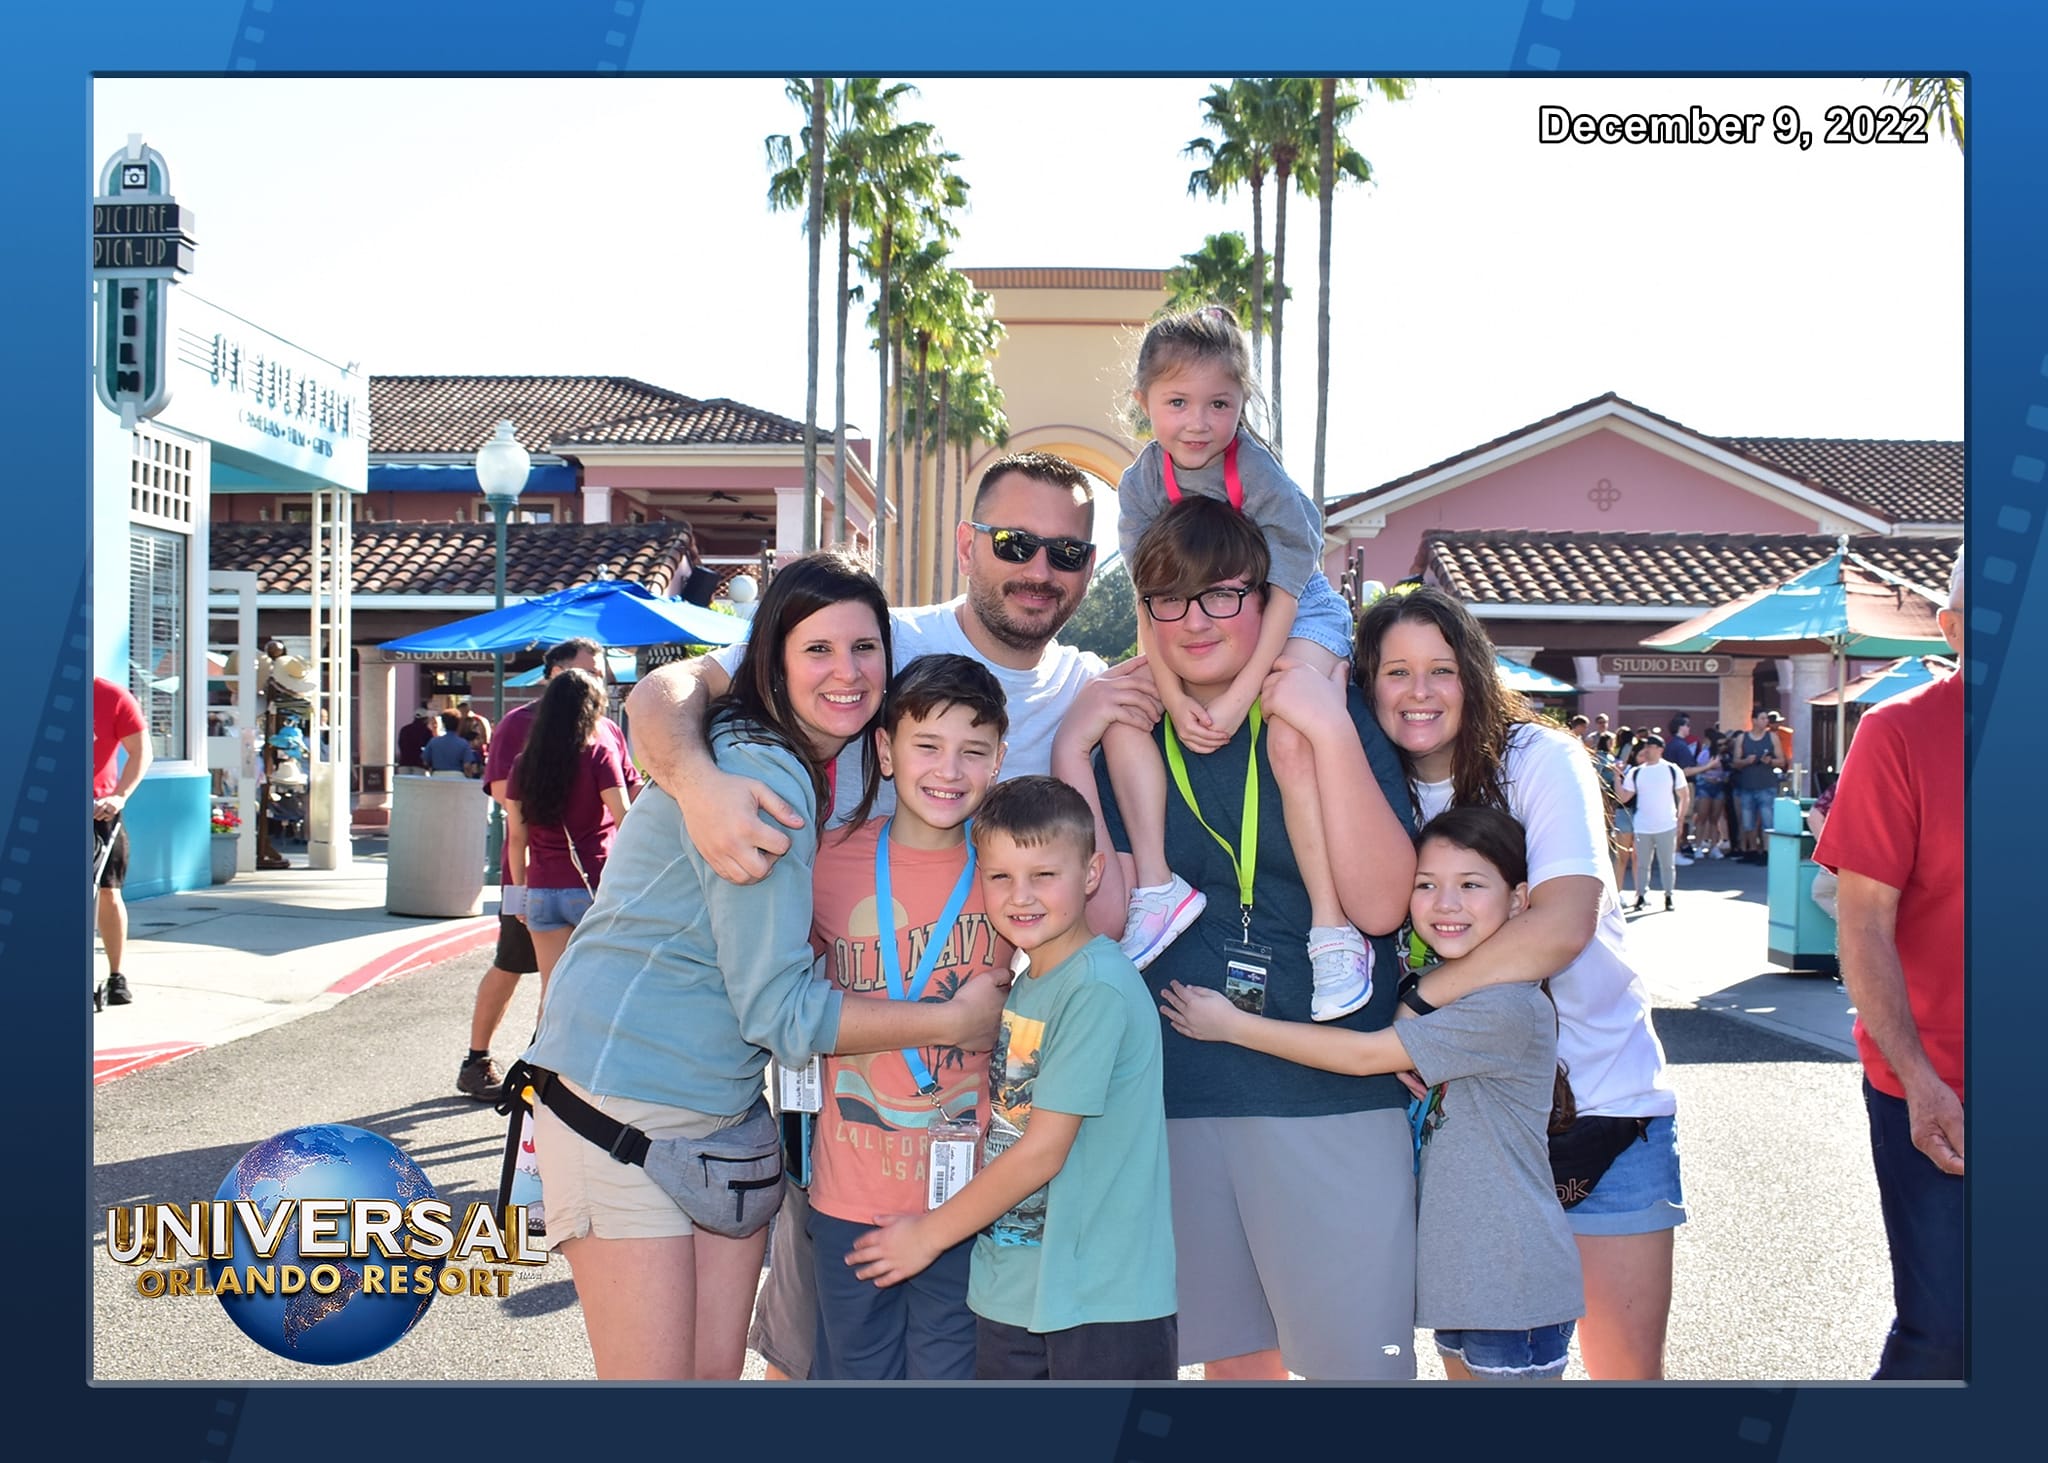 Our family at Universal Studios